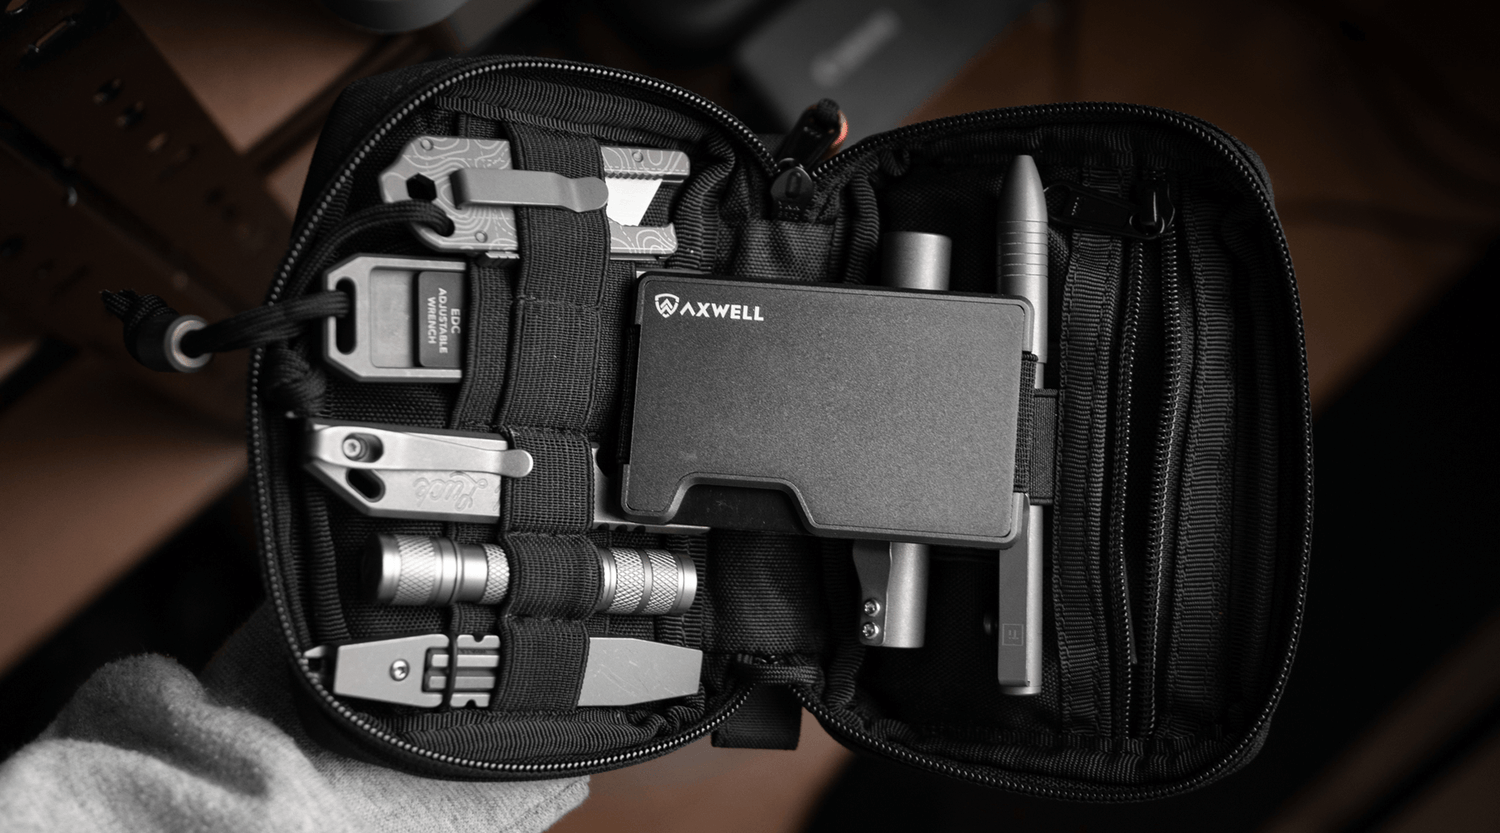 How to Build an EDC (Everyday Carry) Tool Kit